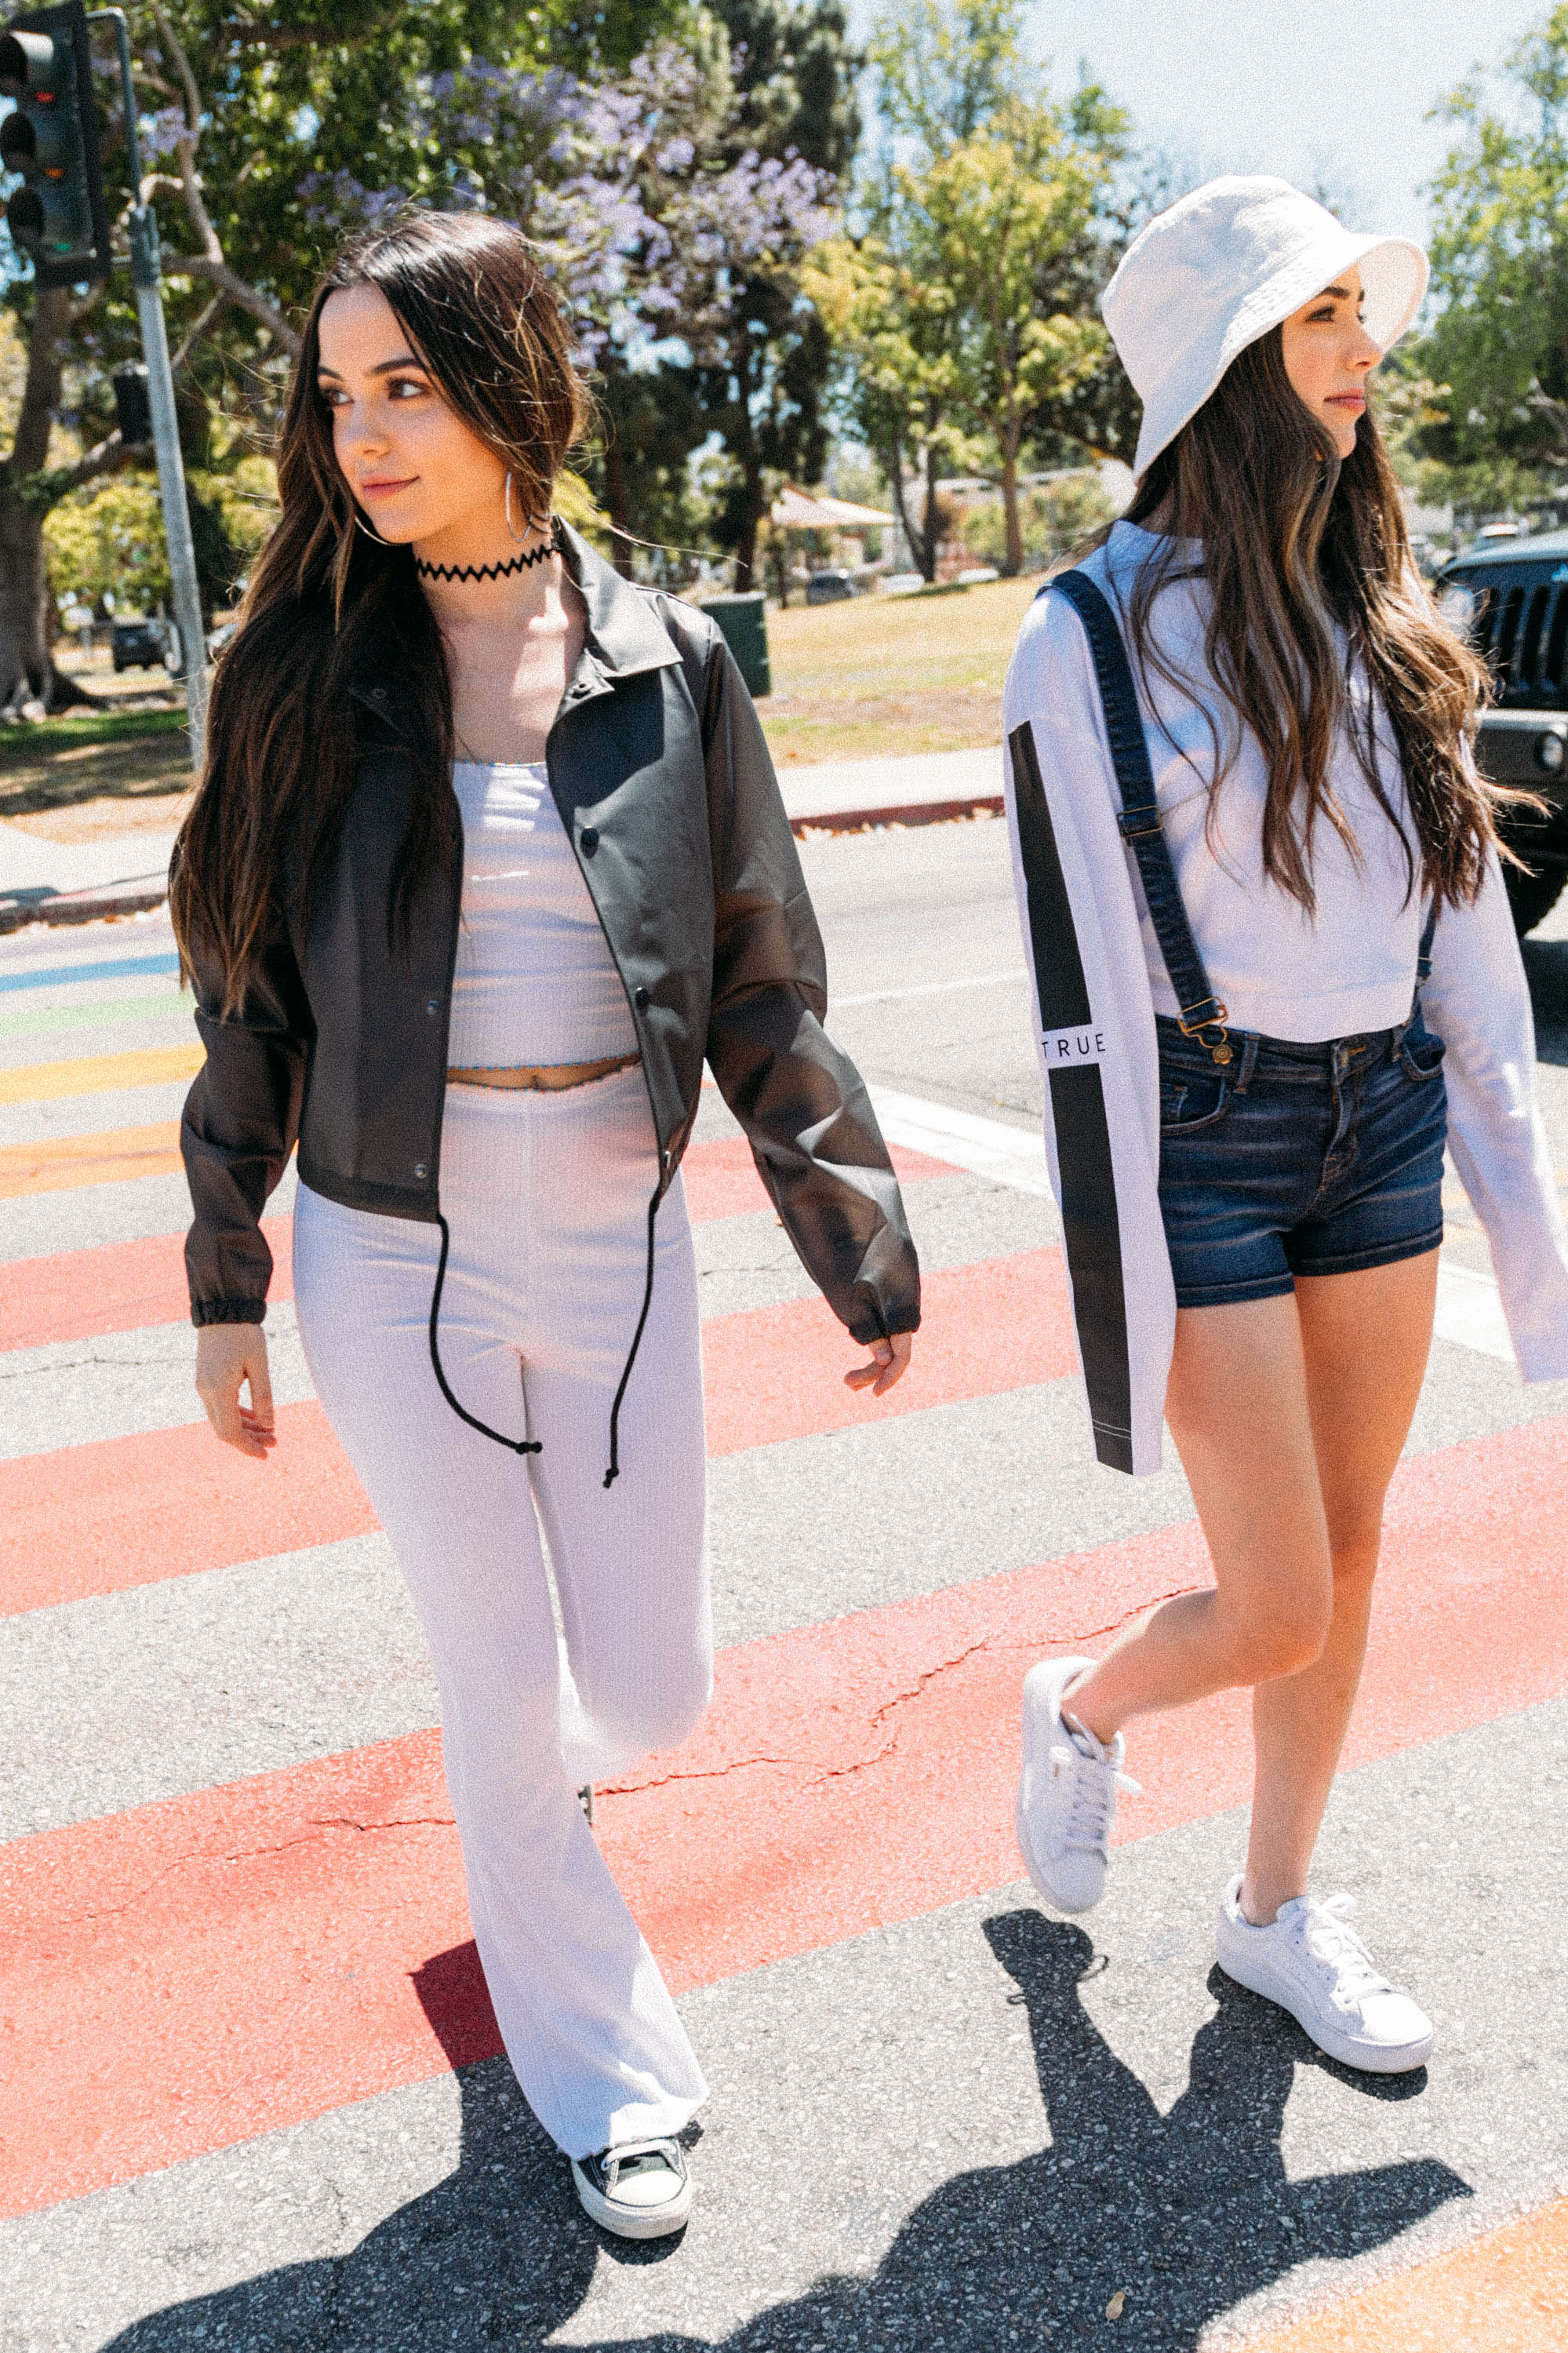 The Merrell Twins Dish on Their True Img Fashion Label | Us Weekly